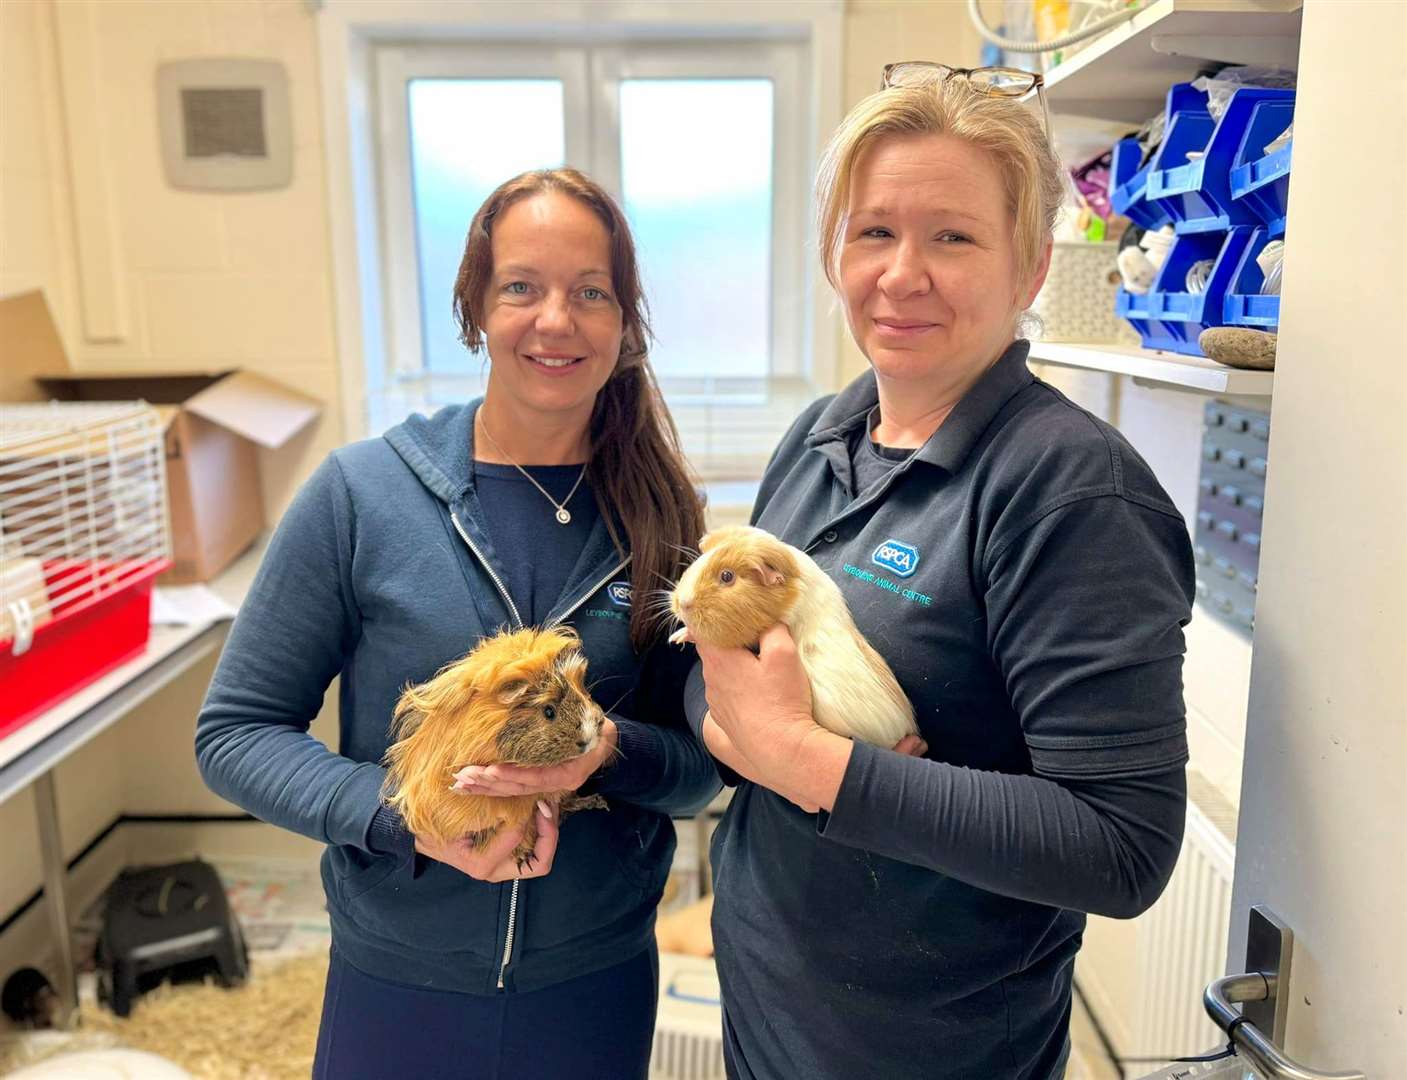 Staff are appealing for help to rehome 93 adorable guinea pigs. Picture: RSPCA